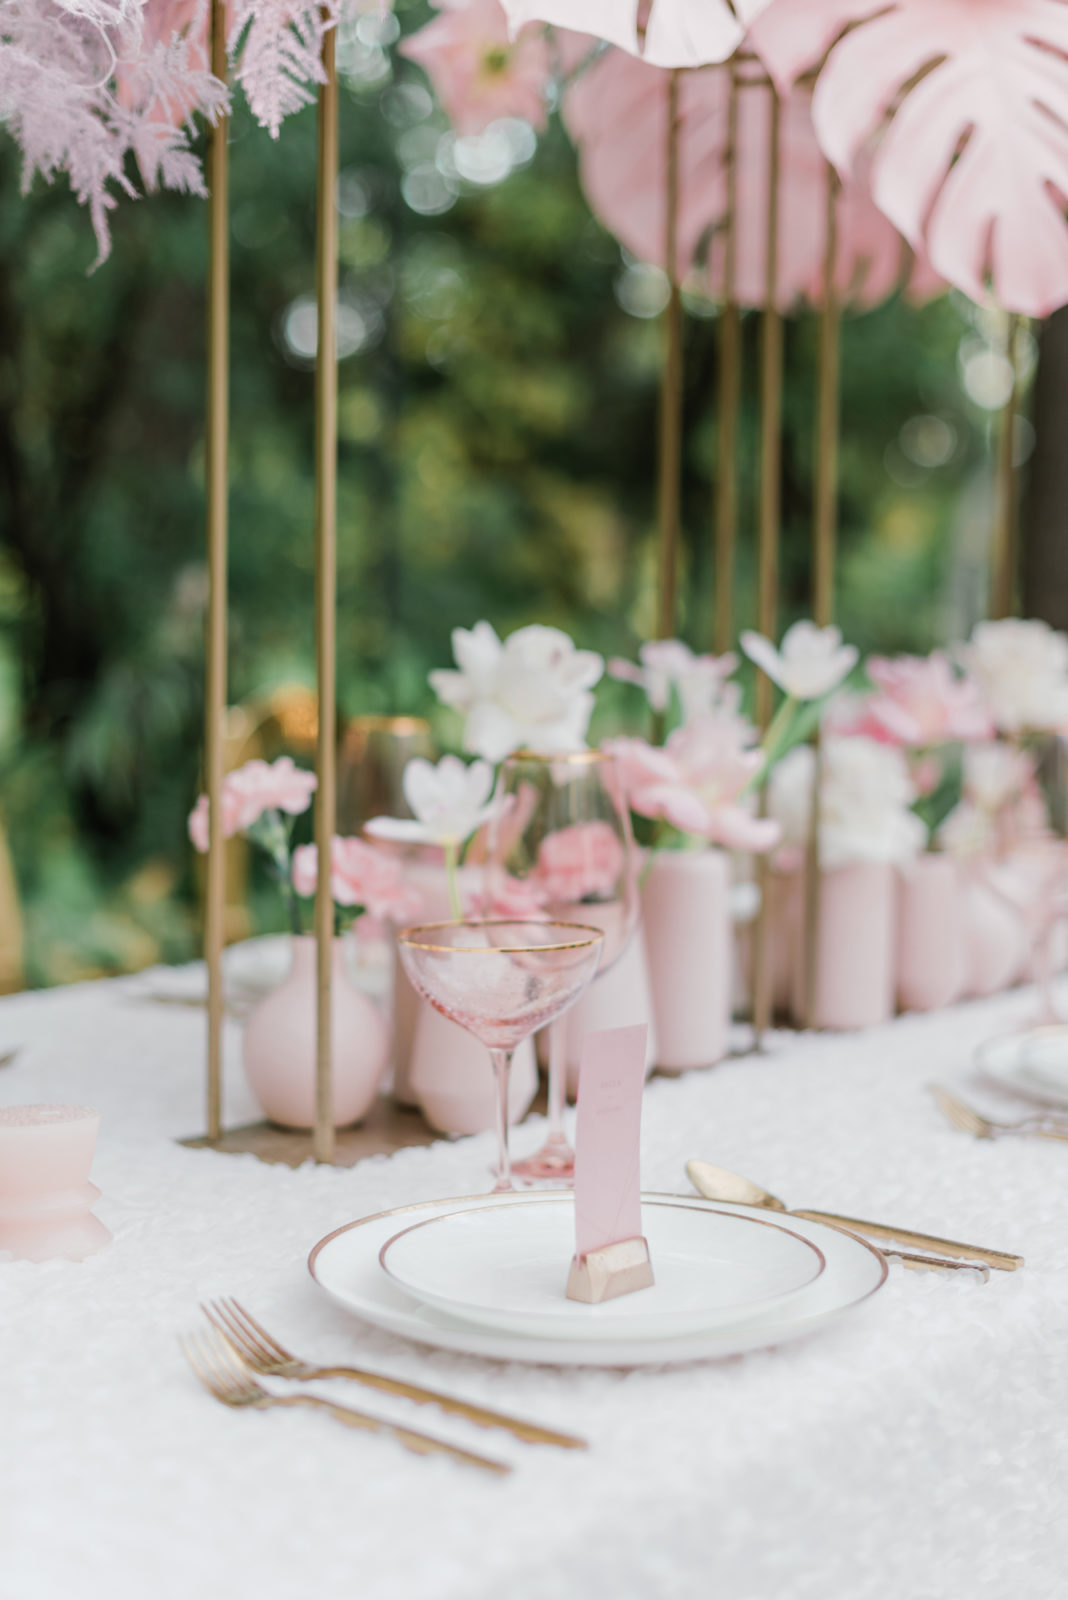 Blush place card inspiration for a romantic wedding